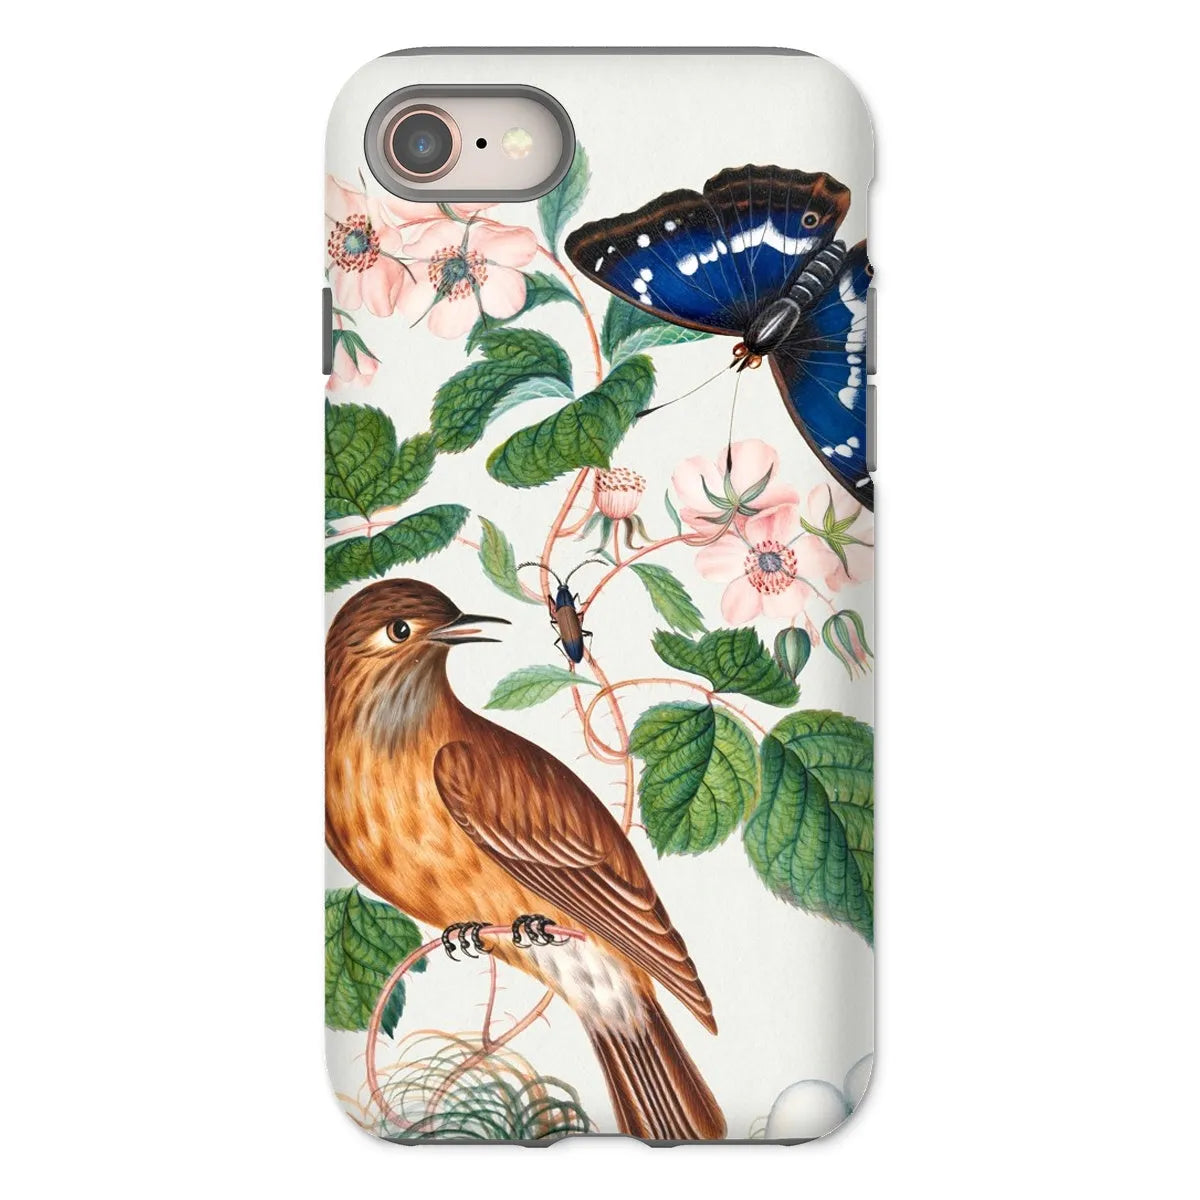 Flycatcher Emperor And Beetle - Art Phone Case - James Bolton - Iphone 8 / Matte - Mobile Phone Cases - Aesthetic Art